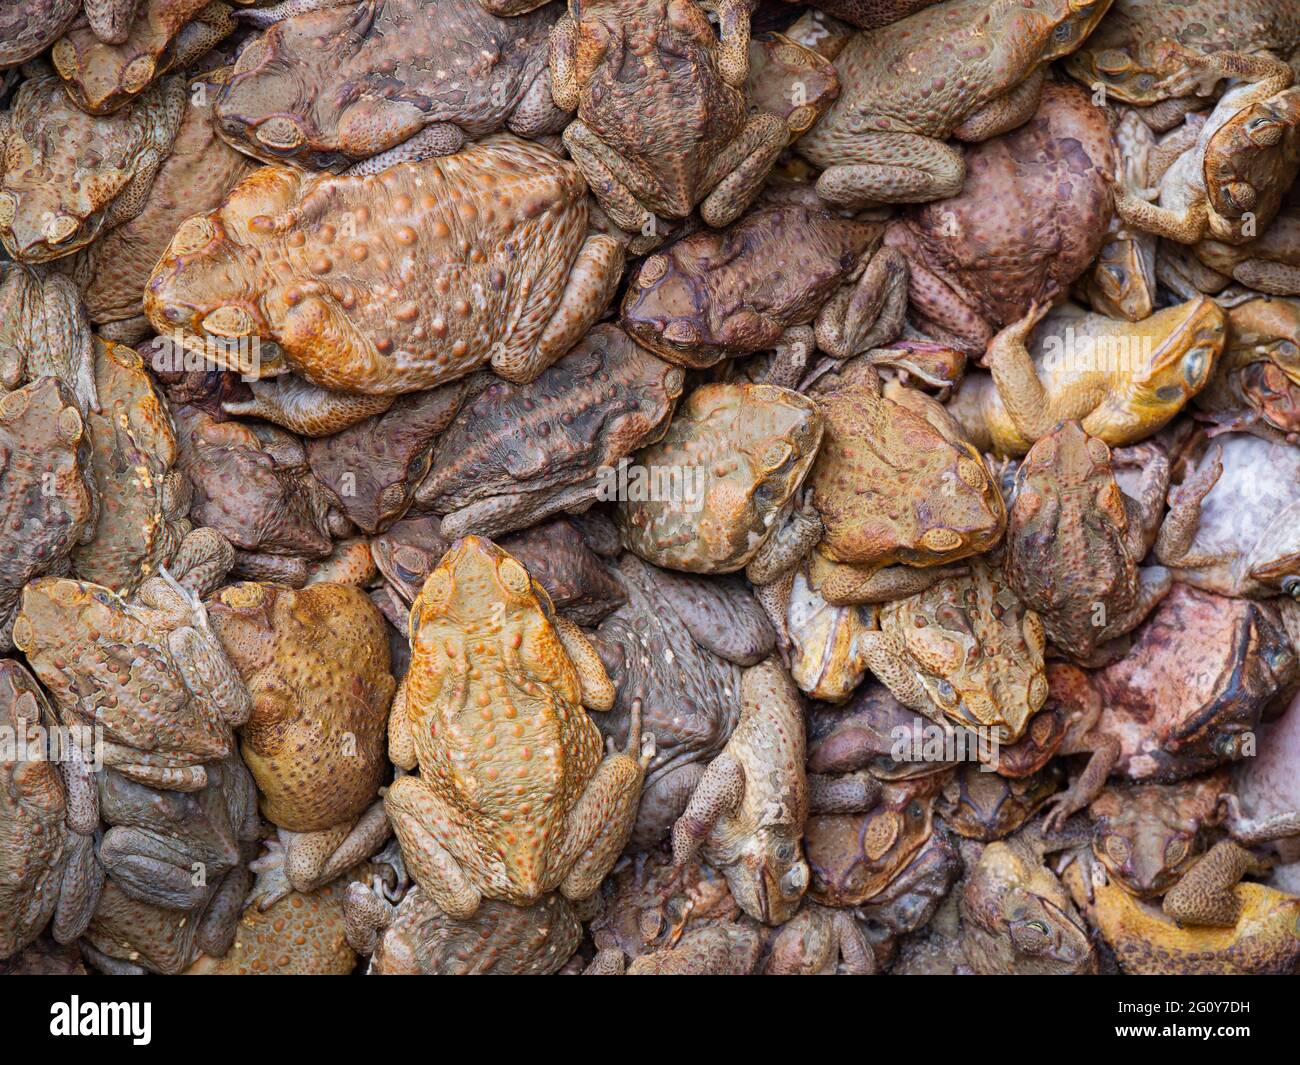 Large number of Cane toads, Rhinella marina, trapped together background. Stock Photo